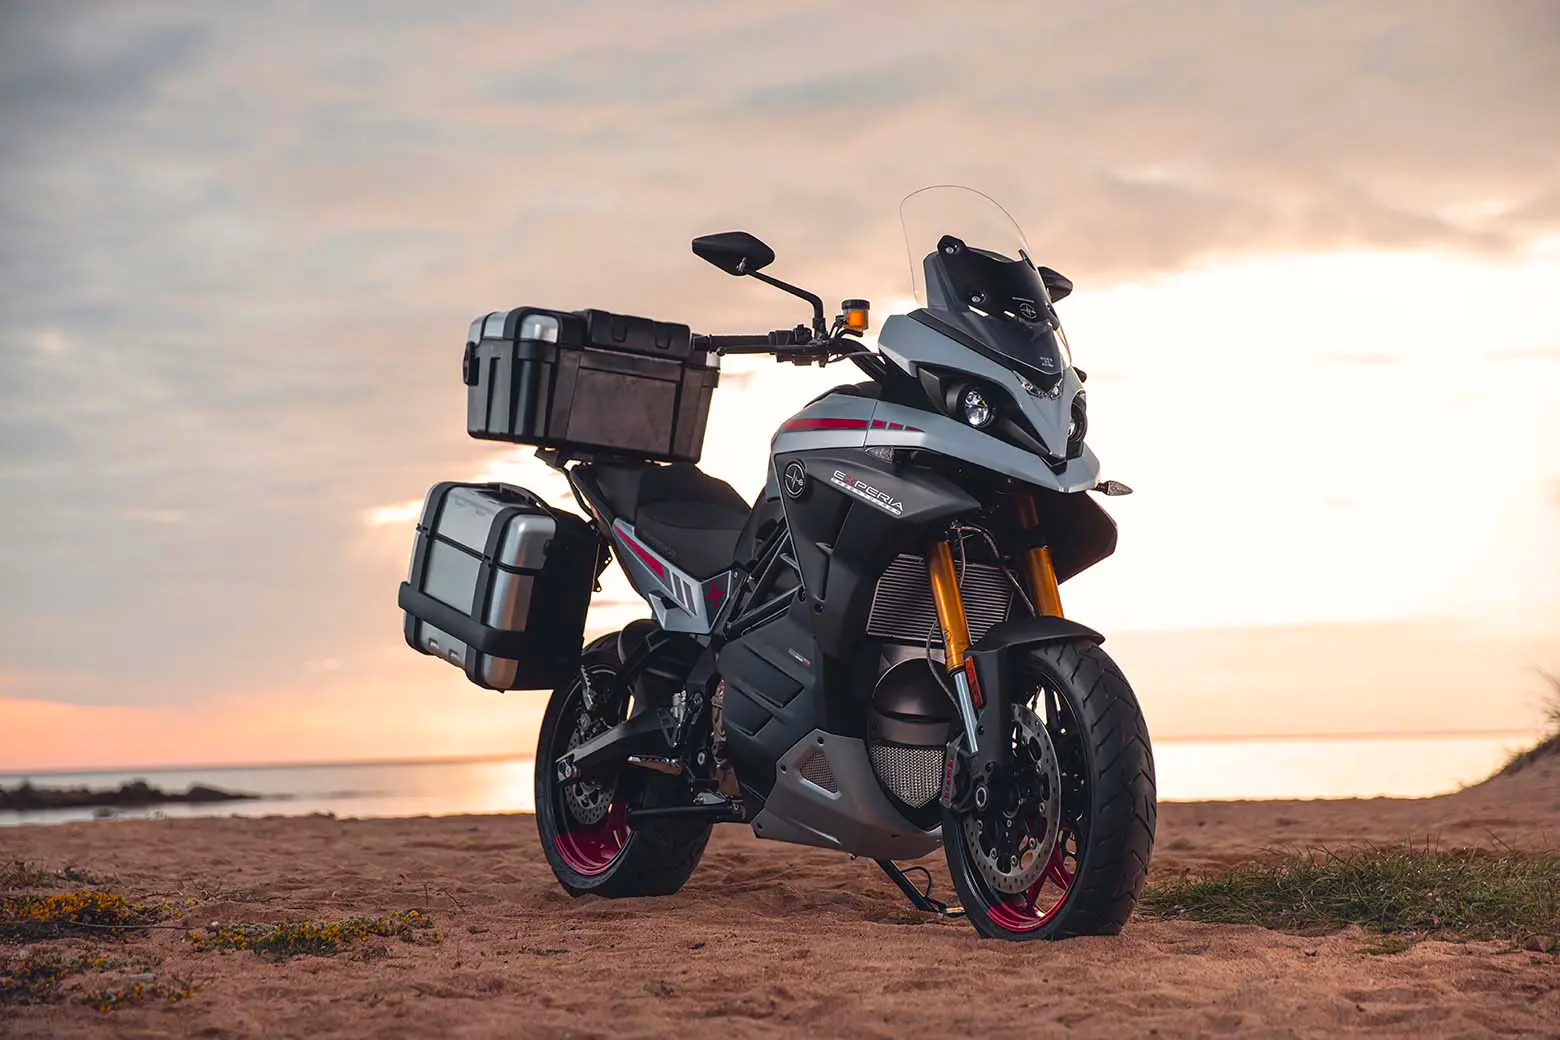 The Energica Experia electric motorcycle parked on a beach at sunset